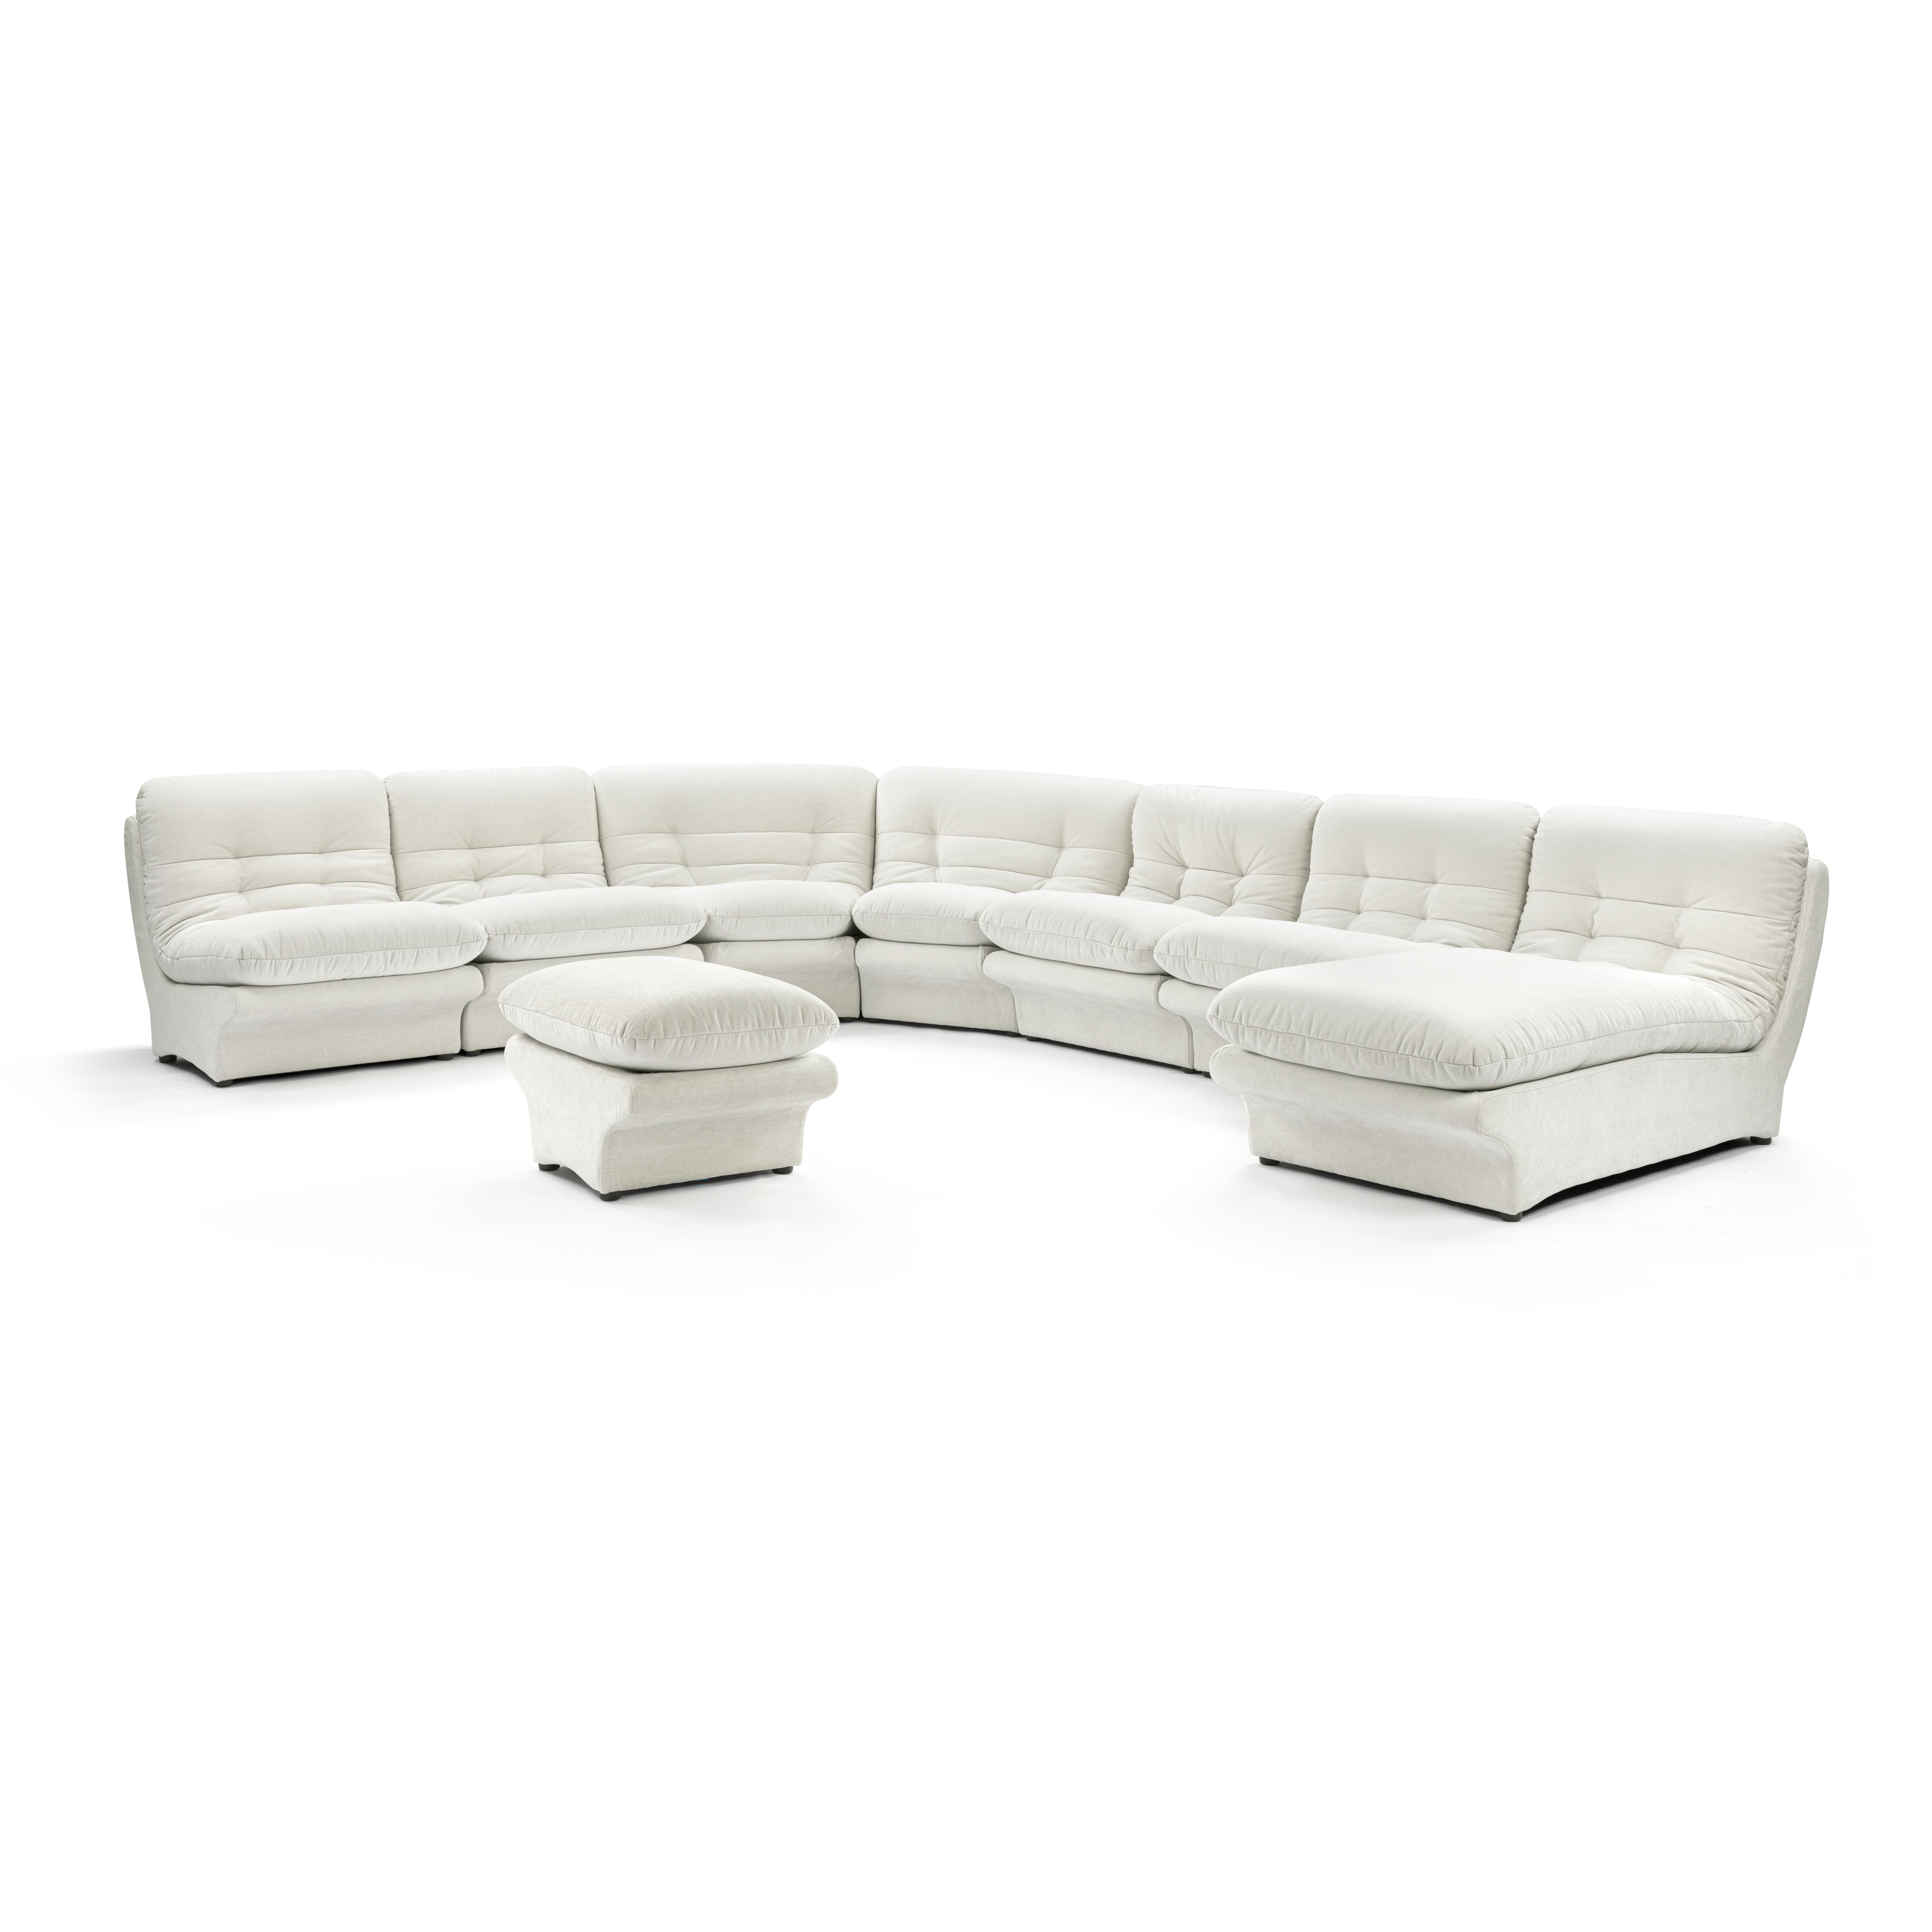 Carsons Mid Century Curved Modular Sectional Sofa / Combination 001 Performance Felt-Natural